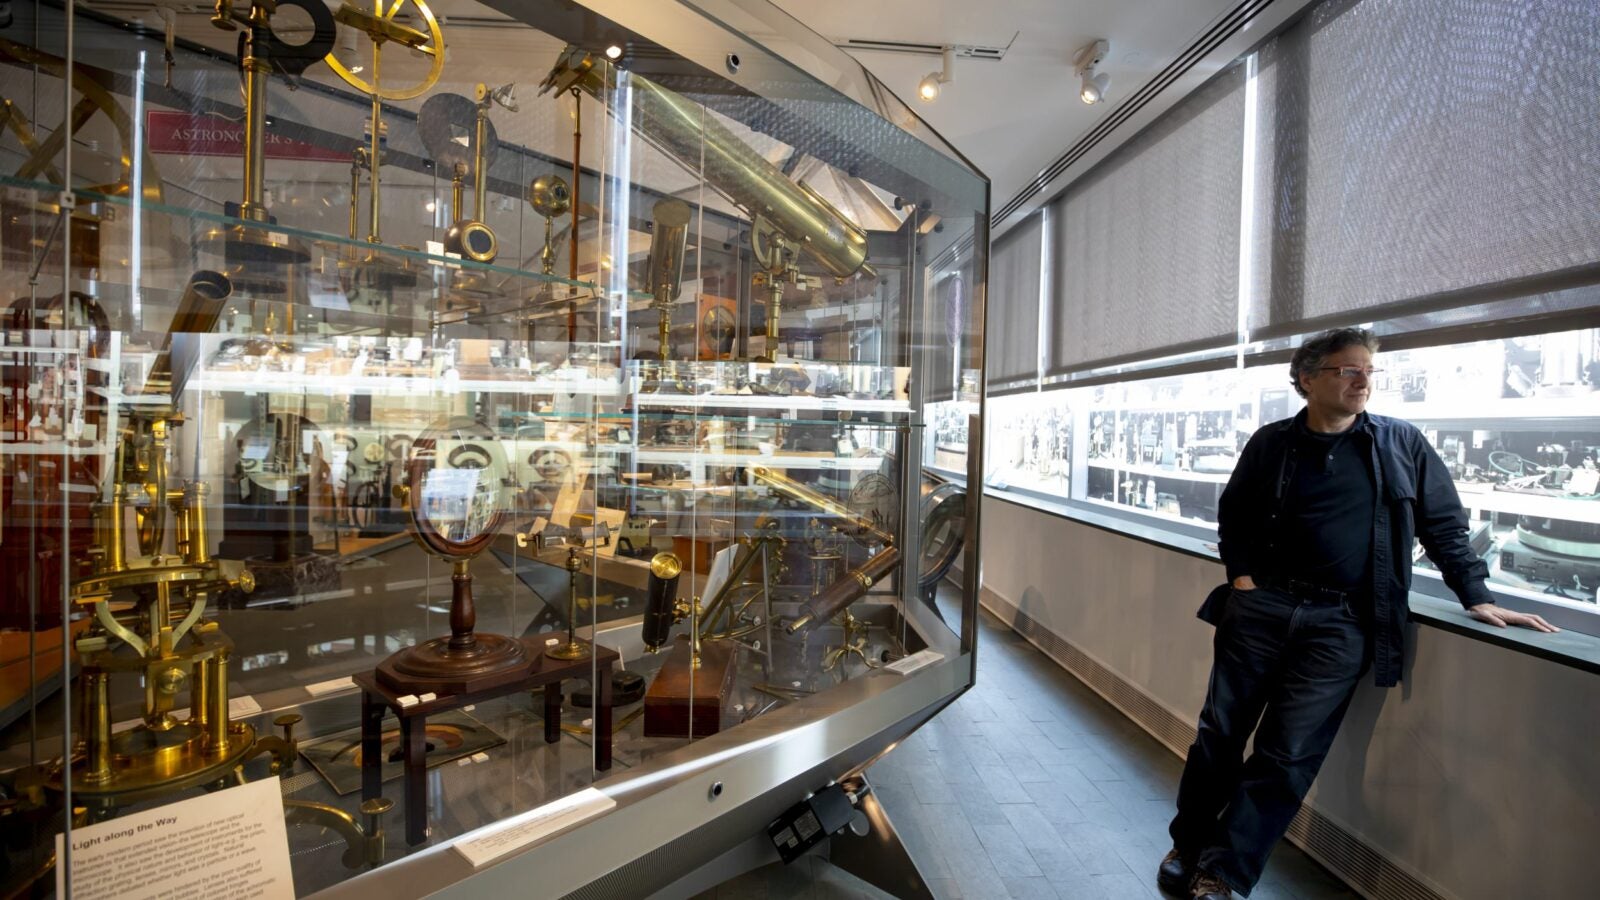 Peter Galison stands by cases of historical scientific instruments.